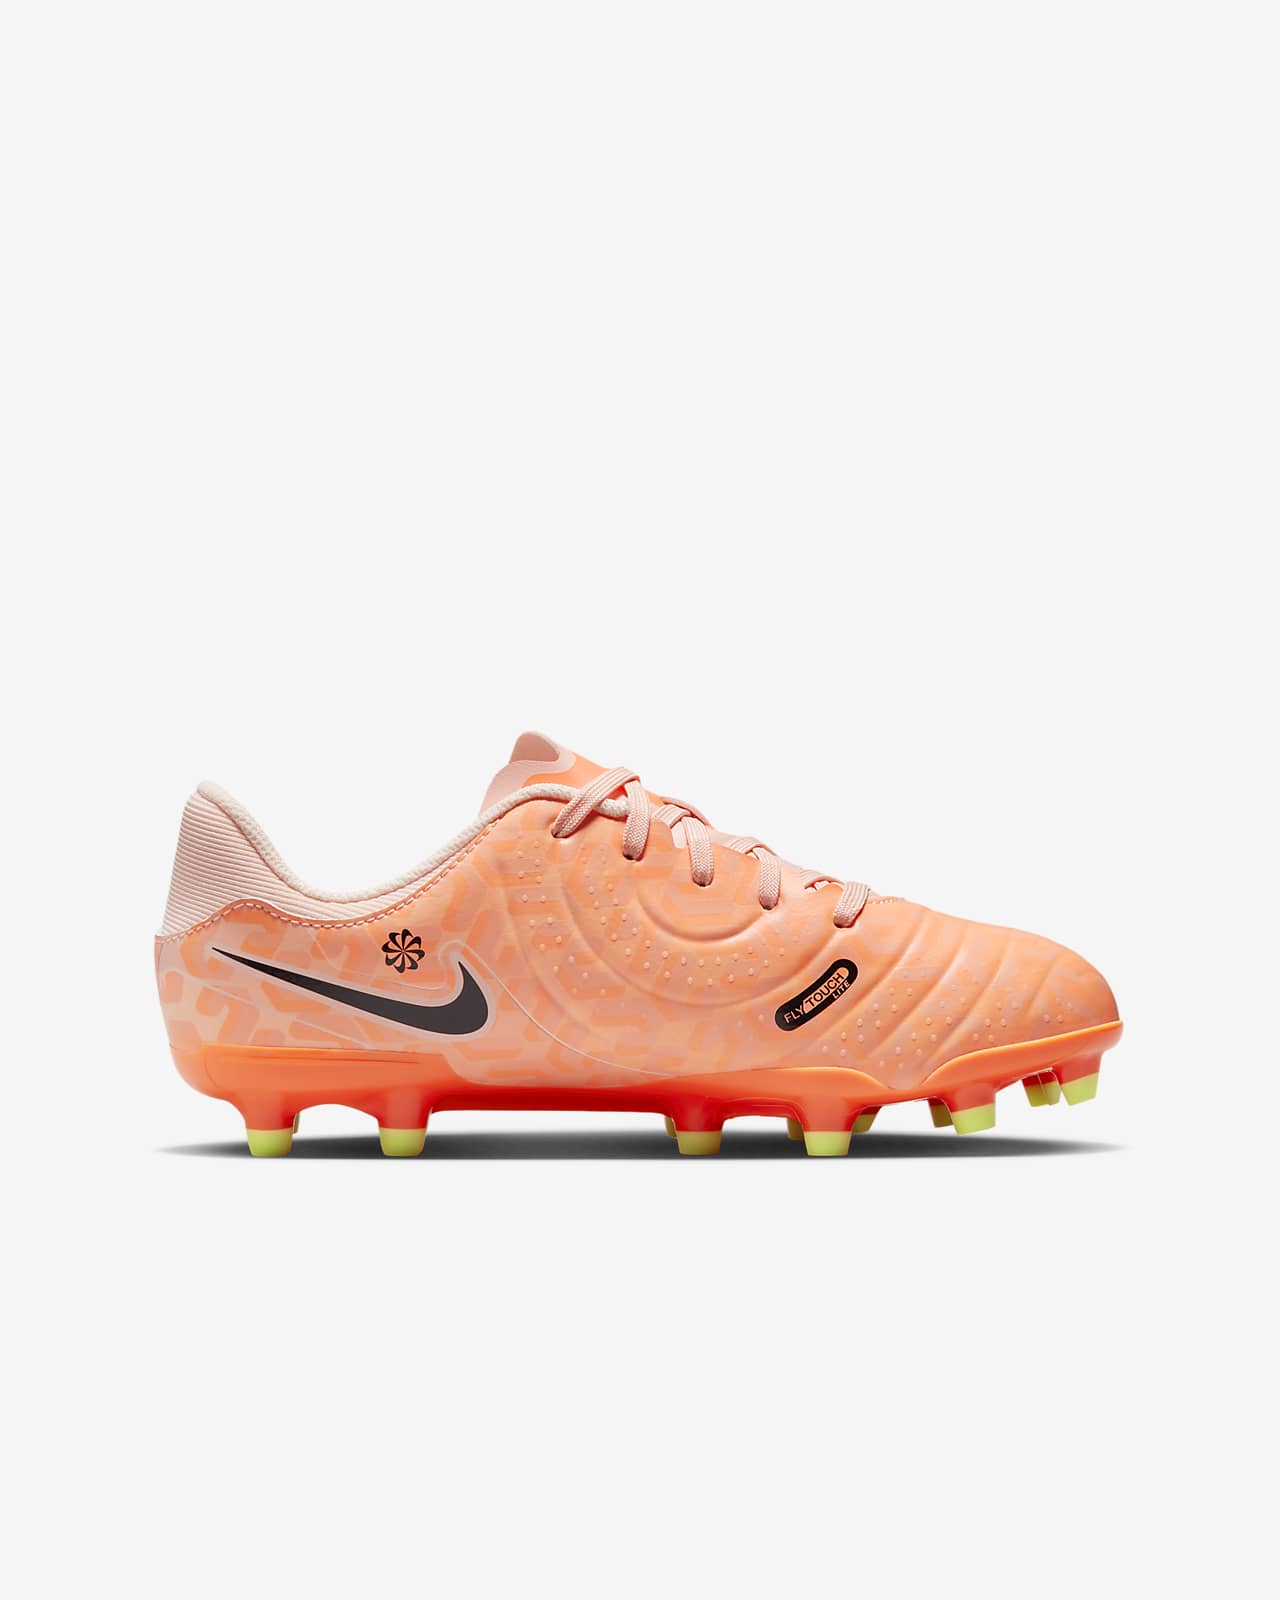 Muelle del puente Illinois Intacto Nike Jr. Tiempo Legend 10 Academy Younger/Older Kids' Multi-Ground Football  Boot. Nike LU